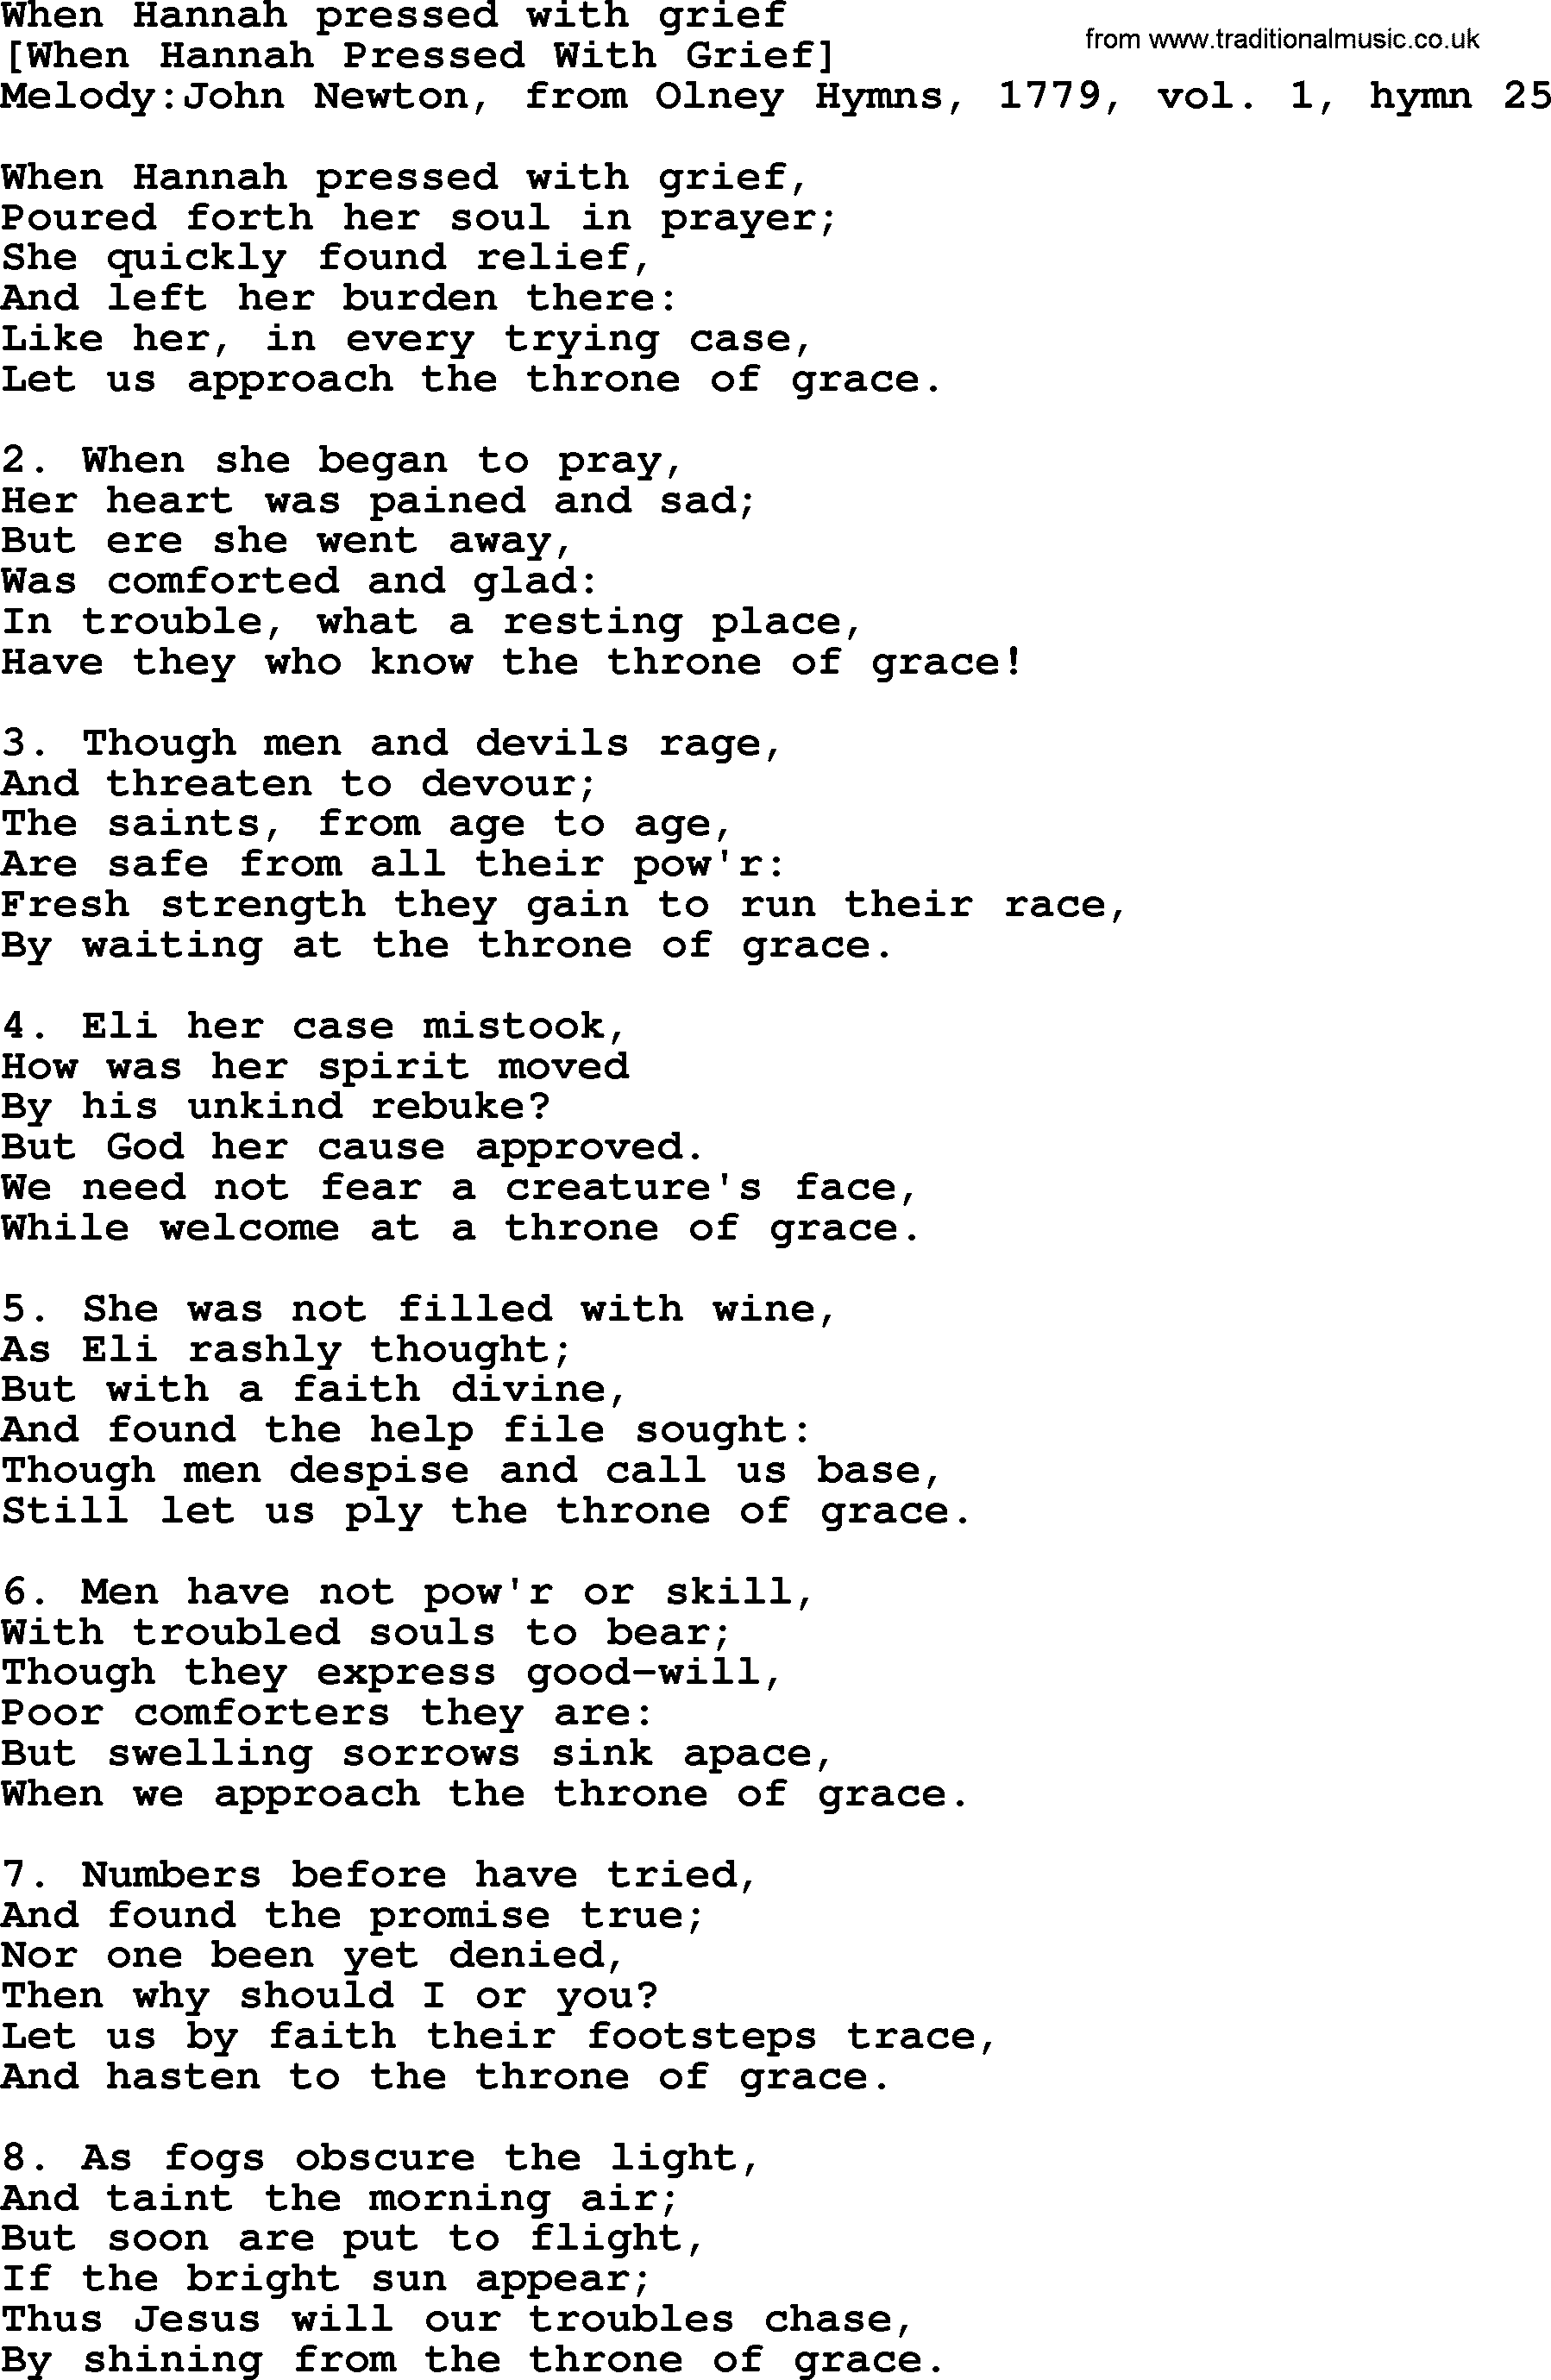 Old English Song: When Hannah Pressed With Grief lyrics